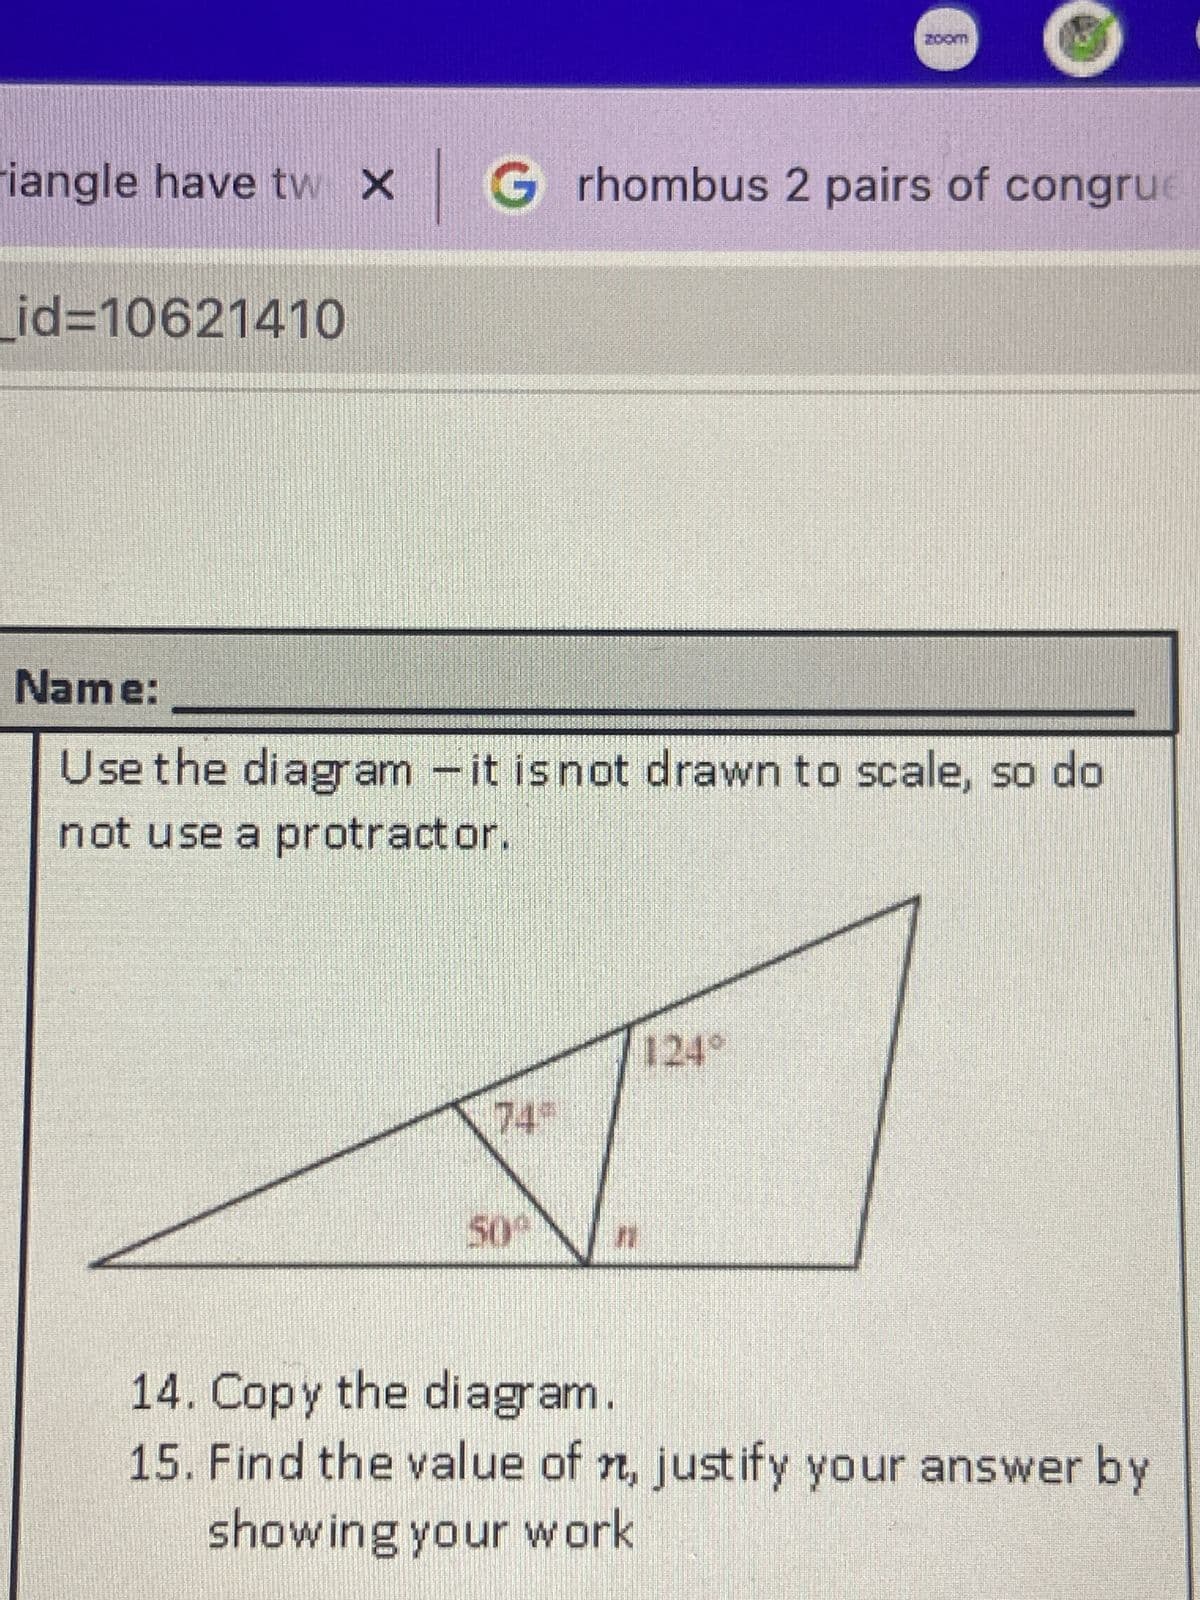 riangle have tw X G rhombus 2 pairs of congrue
_id=10621410
Name:
Use the diagram - it is not drawn to scale, so do
not use a protractor.
500
11
14. Copy the diagram
15. Find the value of nt, justify your answer by
showing your work